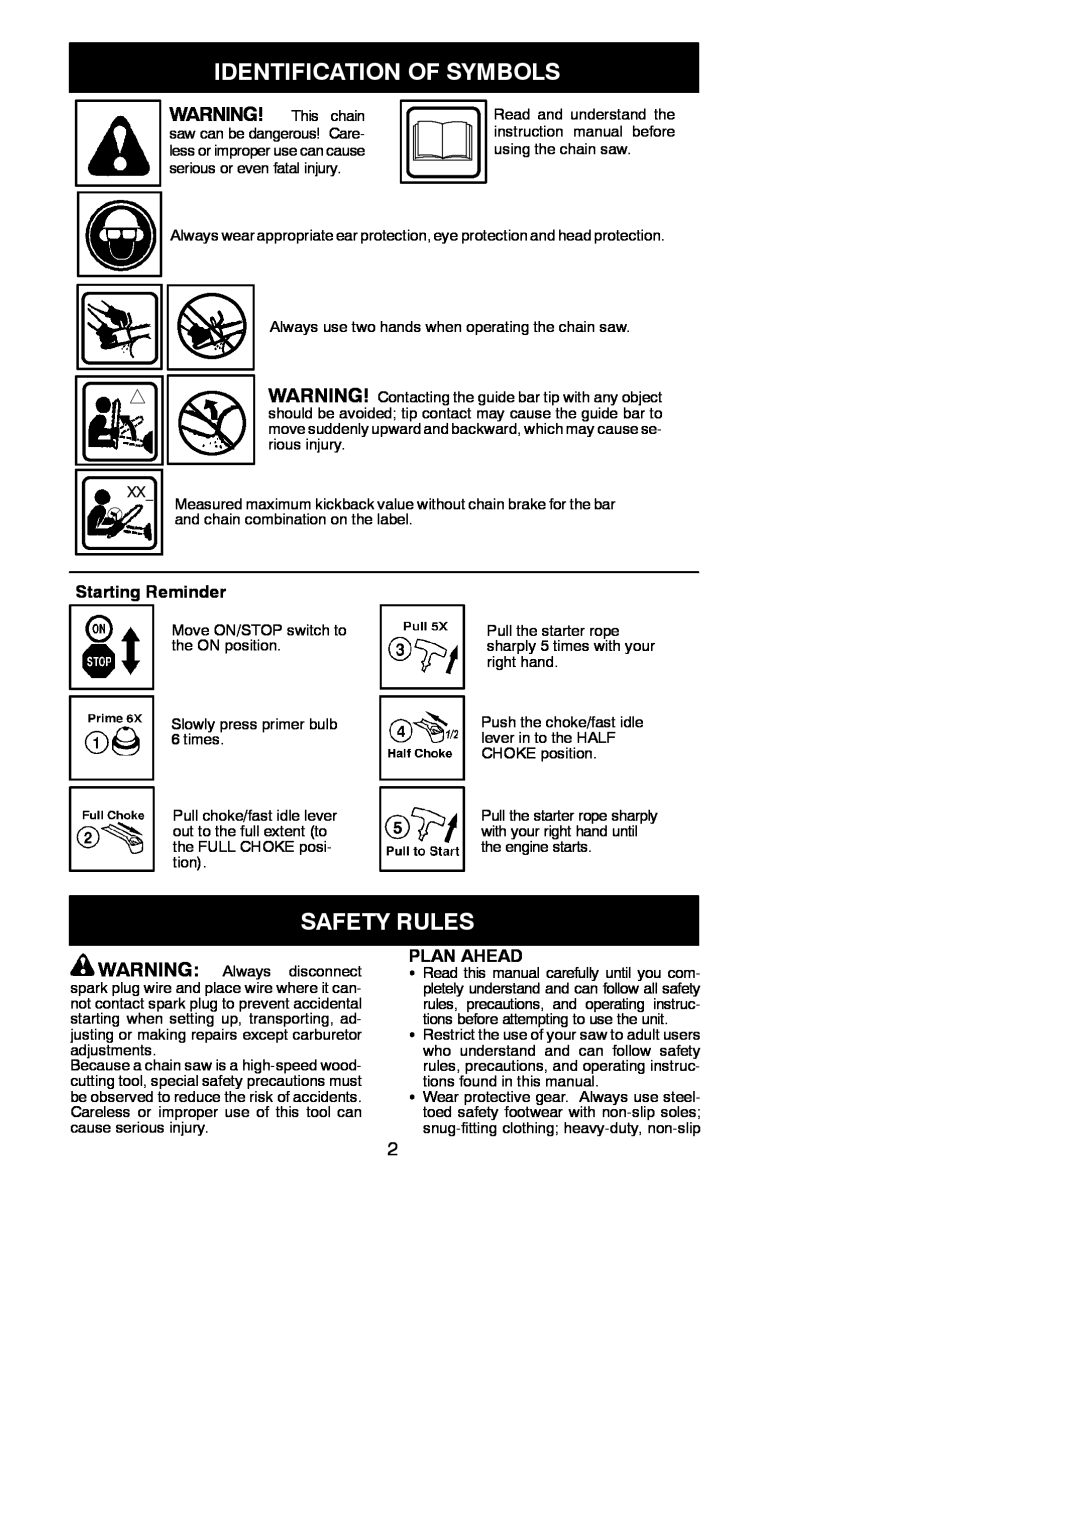 Poulan P4018WTL instruction manual Identification Of Symbols, Safety Rules, Starting Reminder, Plan Ahead 